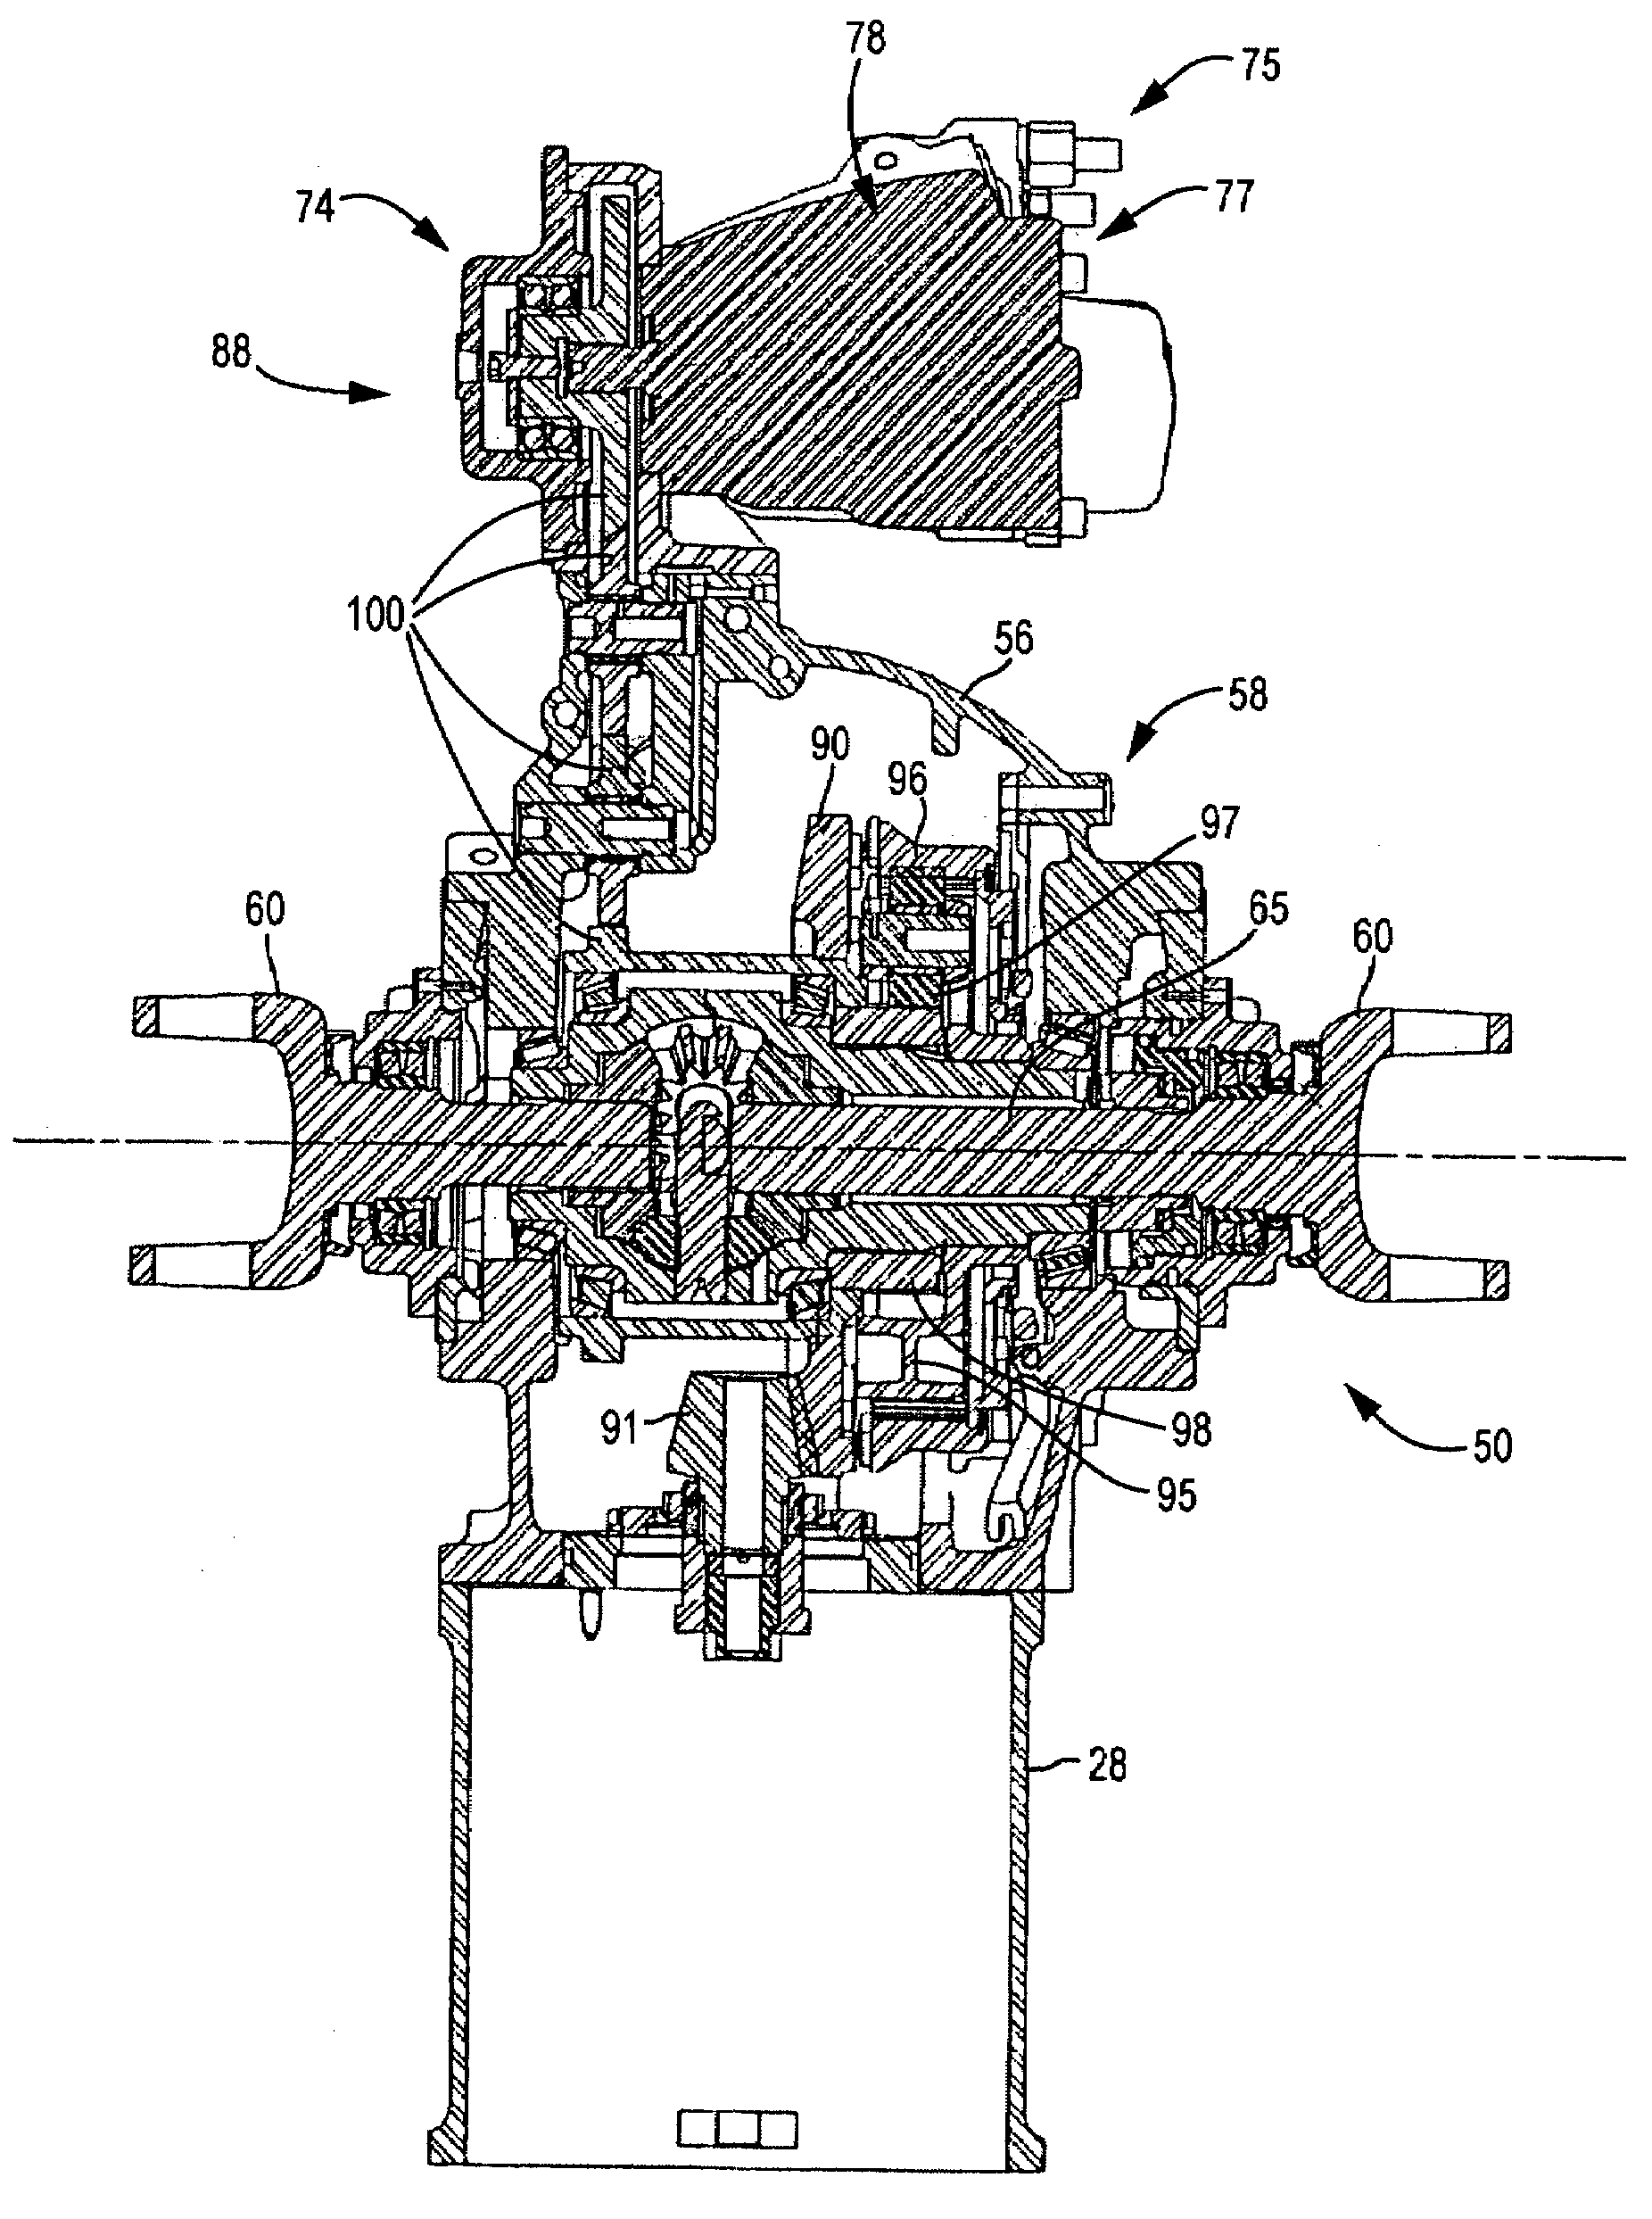 Power takeoff for an electric vehicle